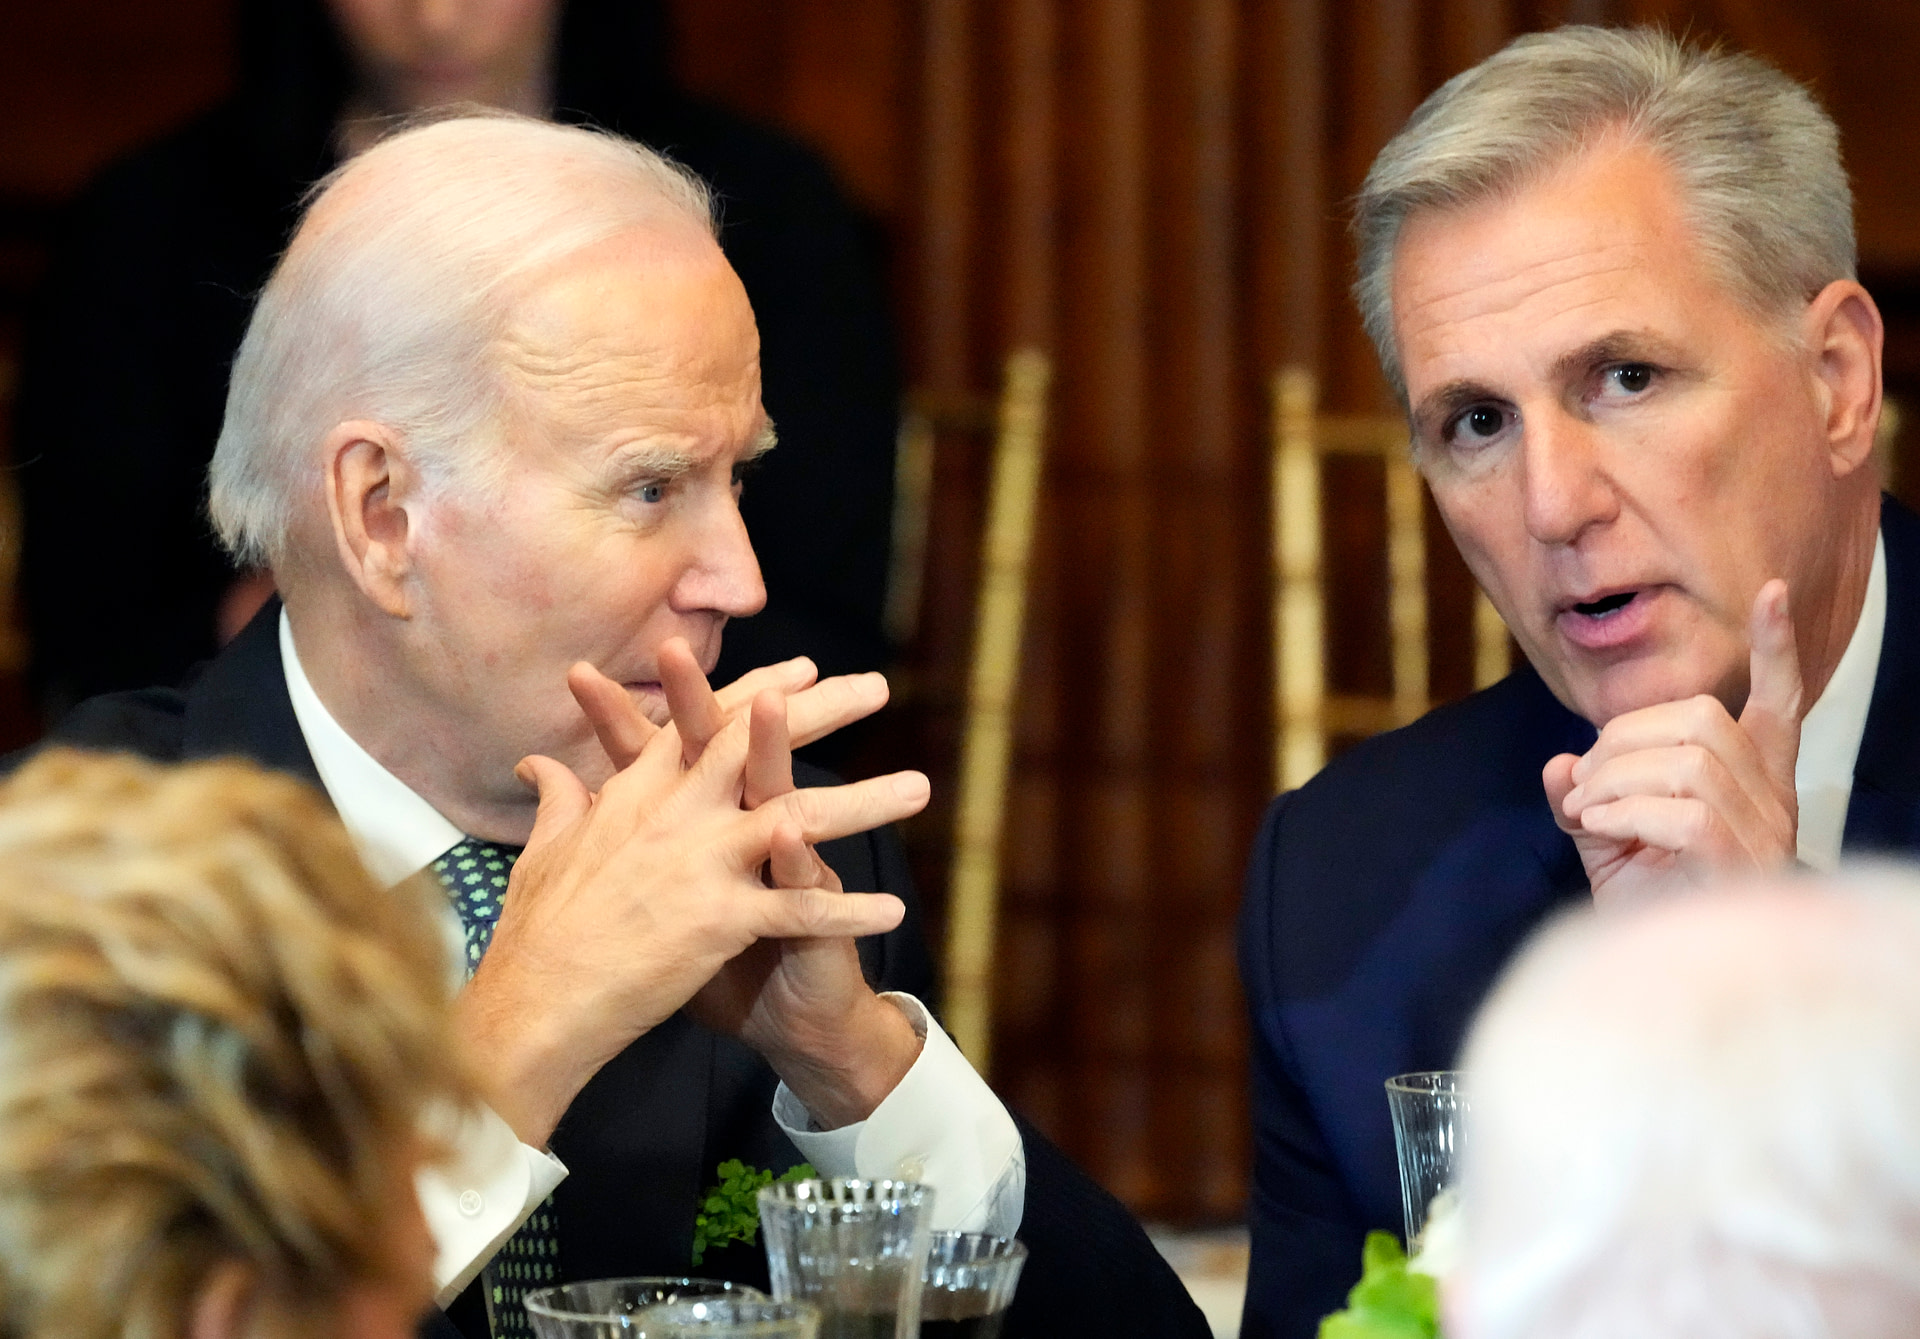 St. Patrick’s Day puts debt rancor aside for Biden and McCarthy